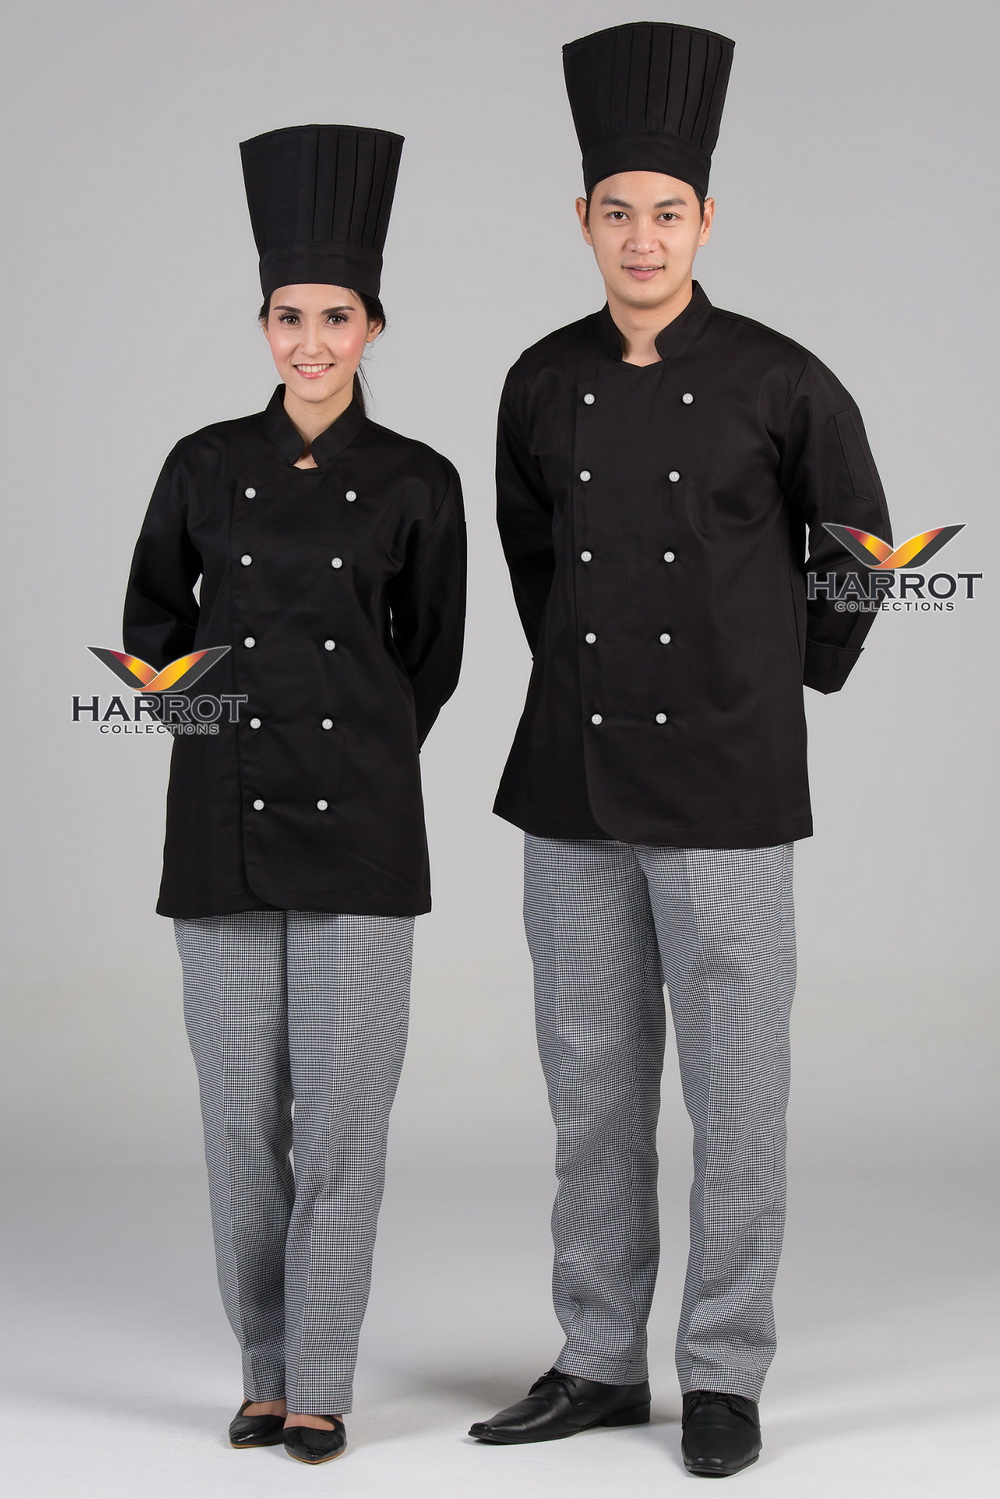 White stud buttons black long sleeve chef jacket